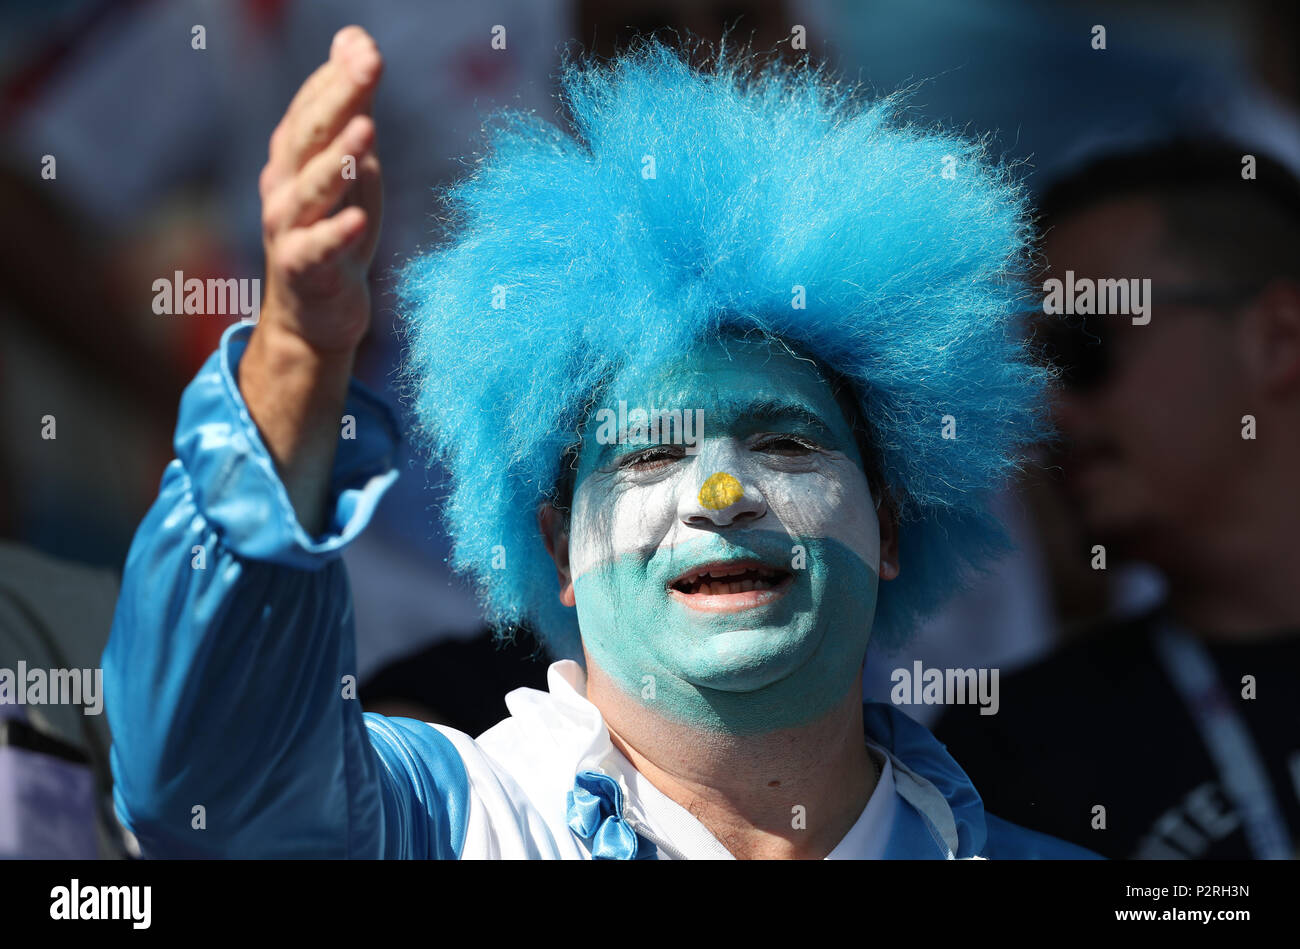 Argentina fan  ARGENTINA V ICELAND  ARGENTINA V ICELAND , 2018 FIFA WORLD CUP RUSSIA  16 June 2018  GBC8158  2018 FIFA World Cup Russia Spartak Stadium Moscow    STRICTLY EDITORIAL USE ONLY.   If The Player/Players Depicted In This Image Is/Are Playing For An English Club Or The England National Team.   Then This Image May Only Be Used For Editorial Purposes. No Commercial Use.    The Following Usages Are Also Restricted EVEN IF IN AN EDITORIAL CONTEXT:   Use in conjuction with, or part of, any unauthorized audio, video, data, fixture lists, club/league logos, Betting, Games or any 'live' serv Stock Photo